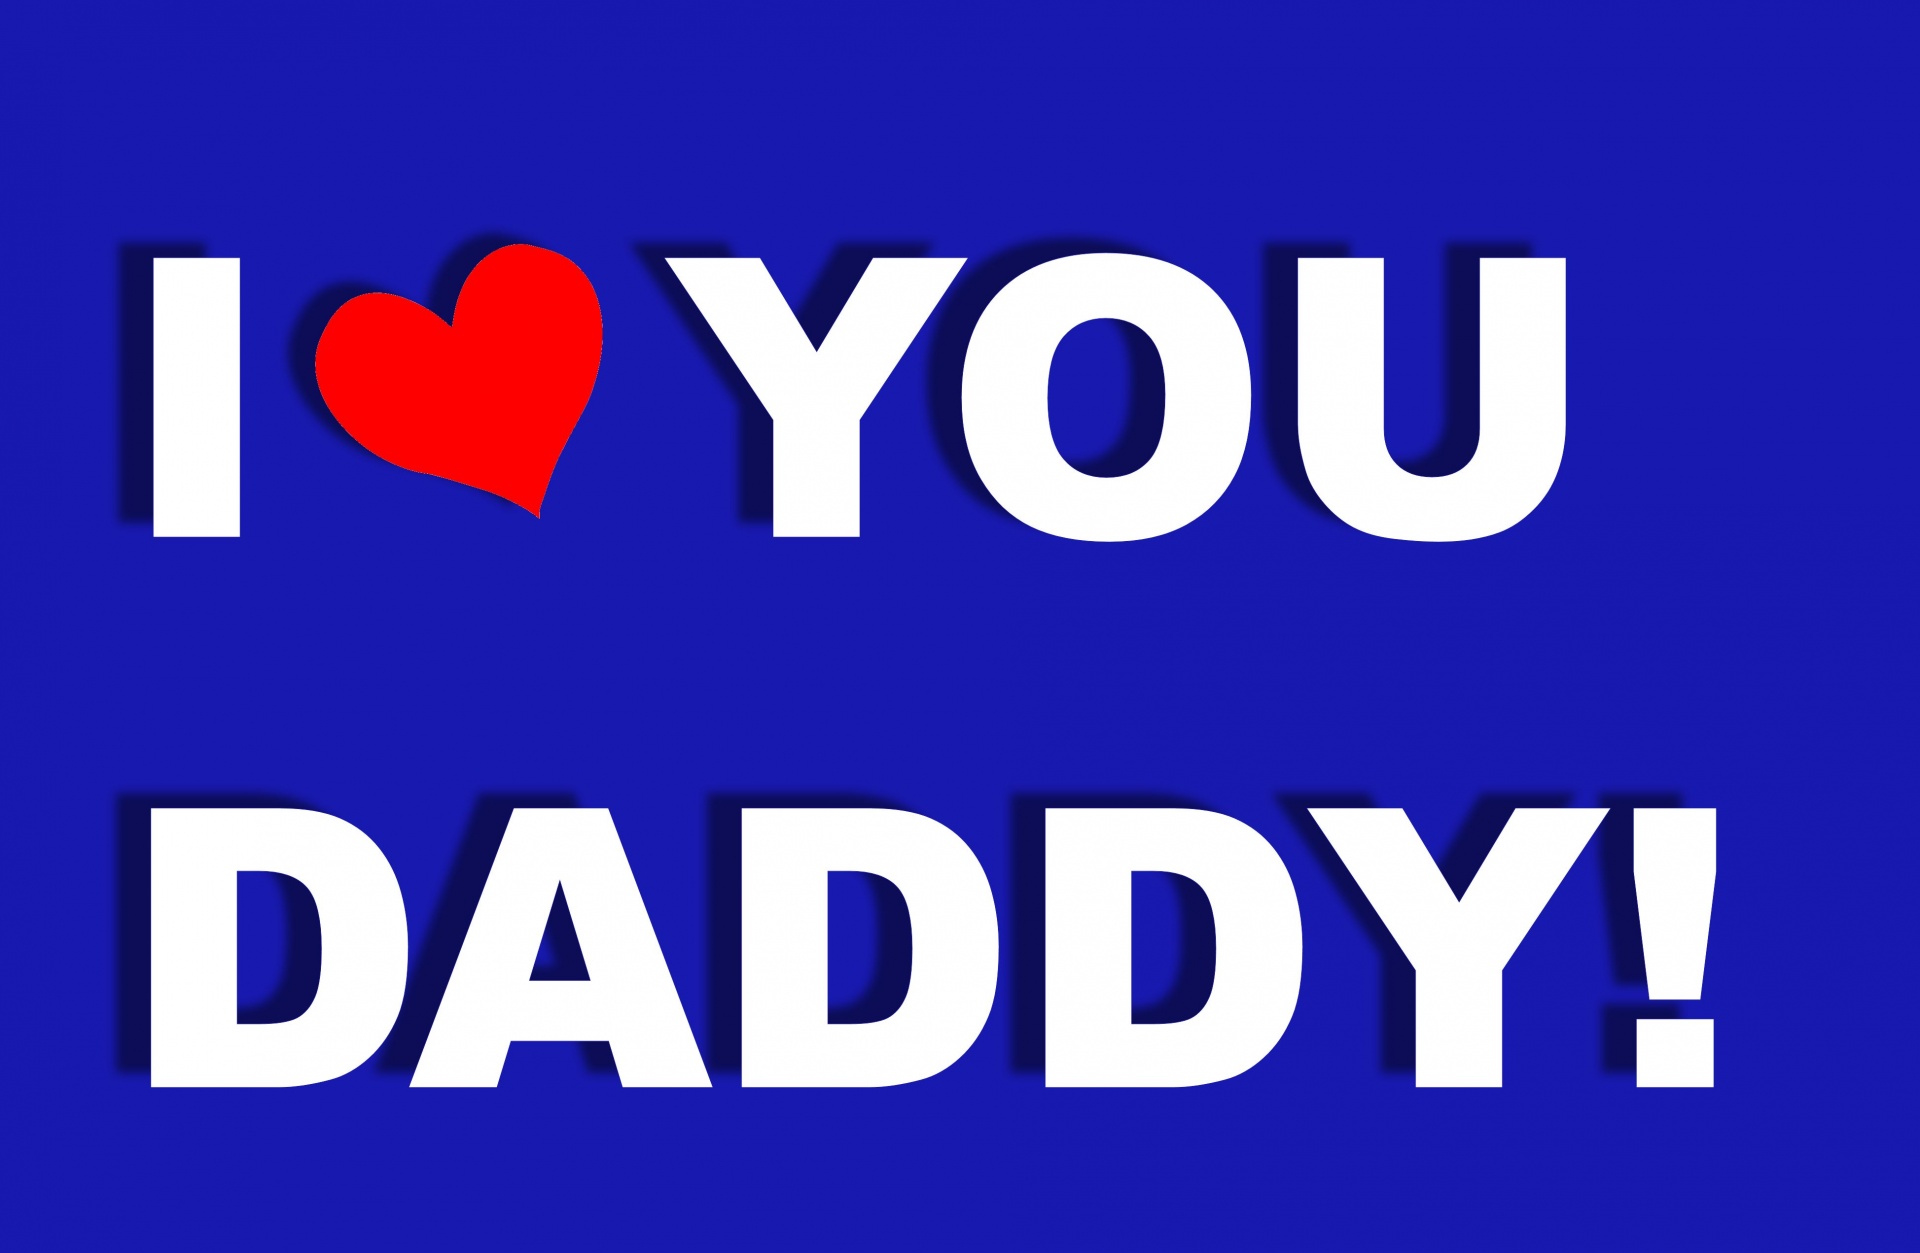 i love you daddy poster free photo